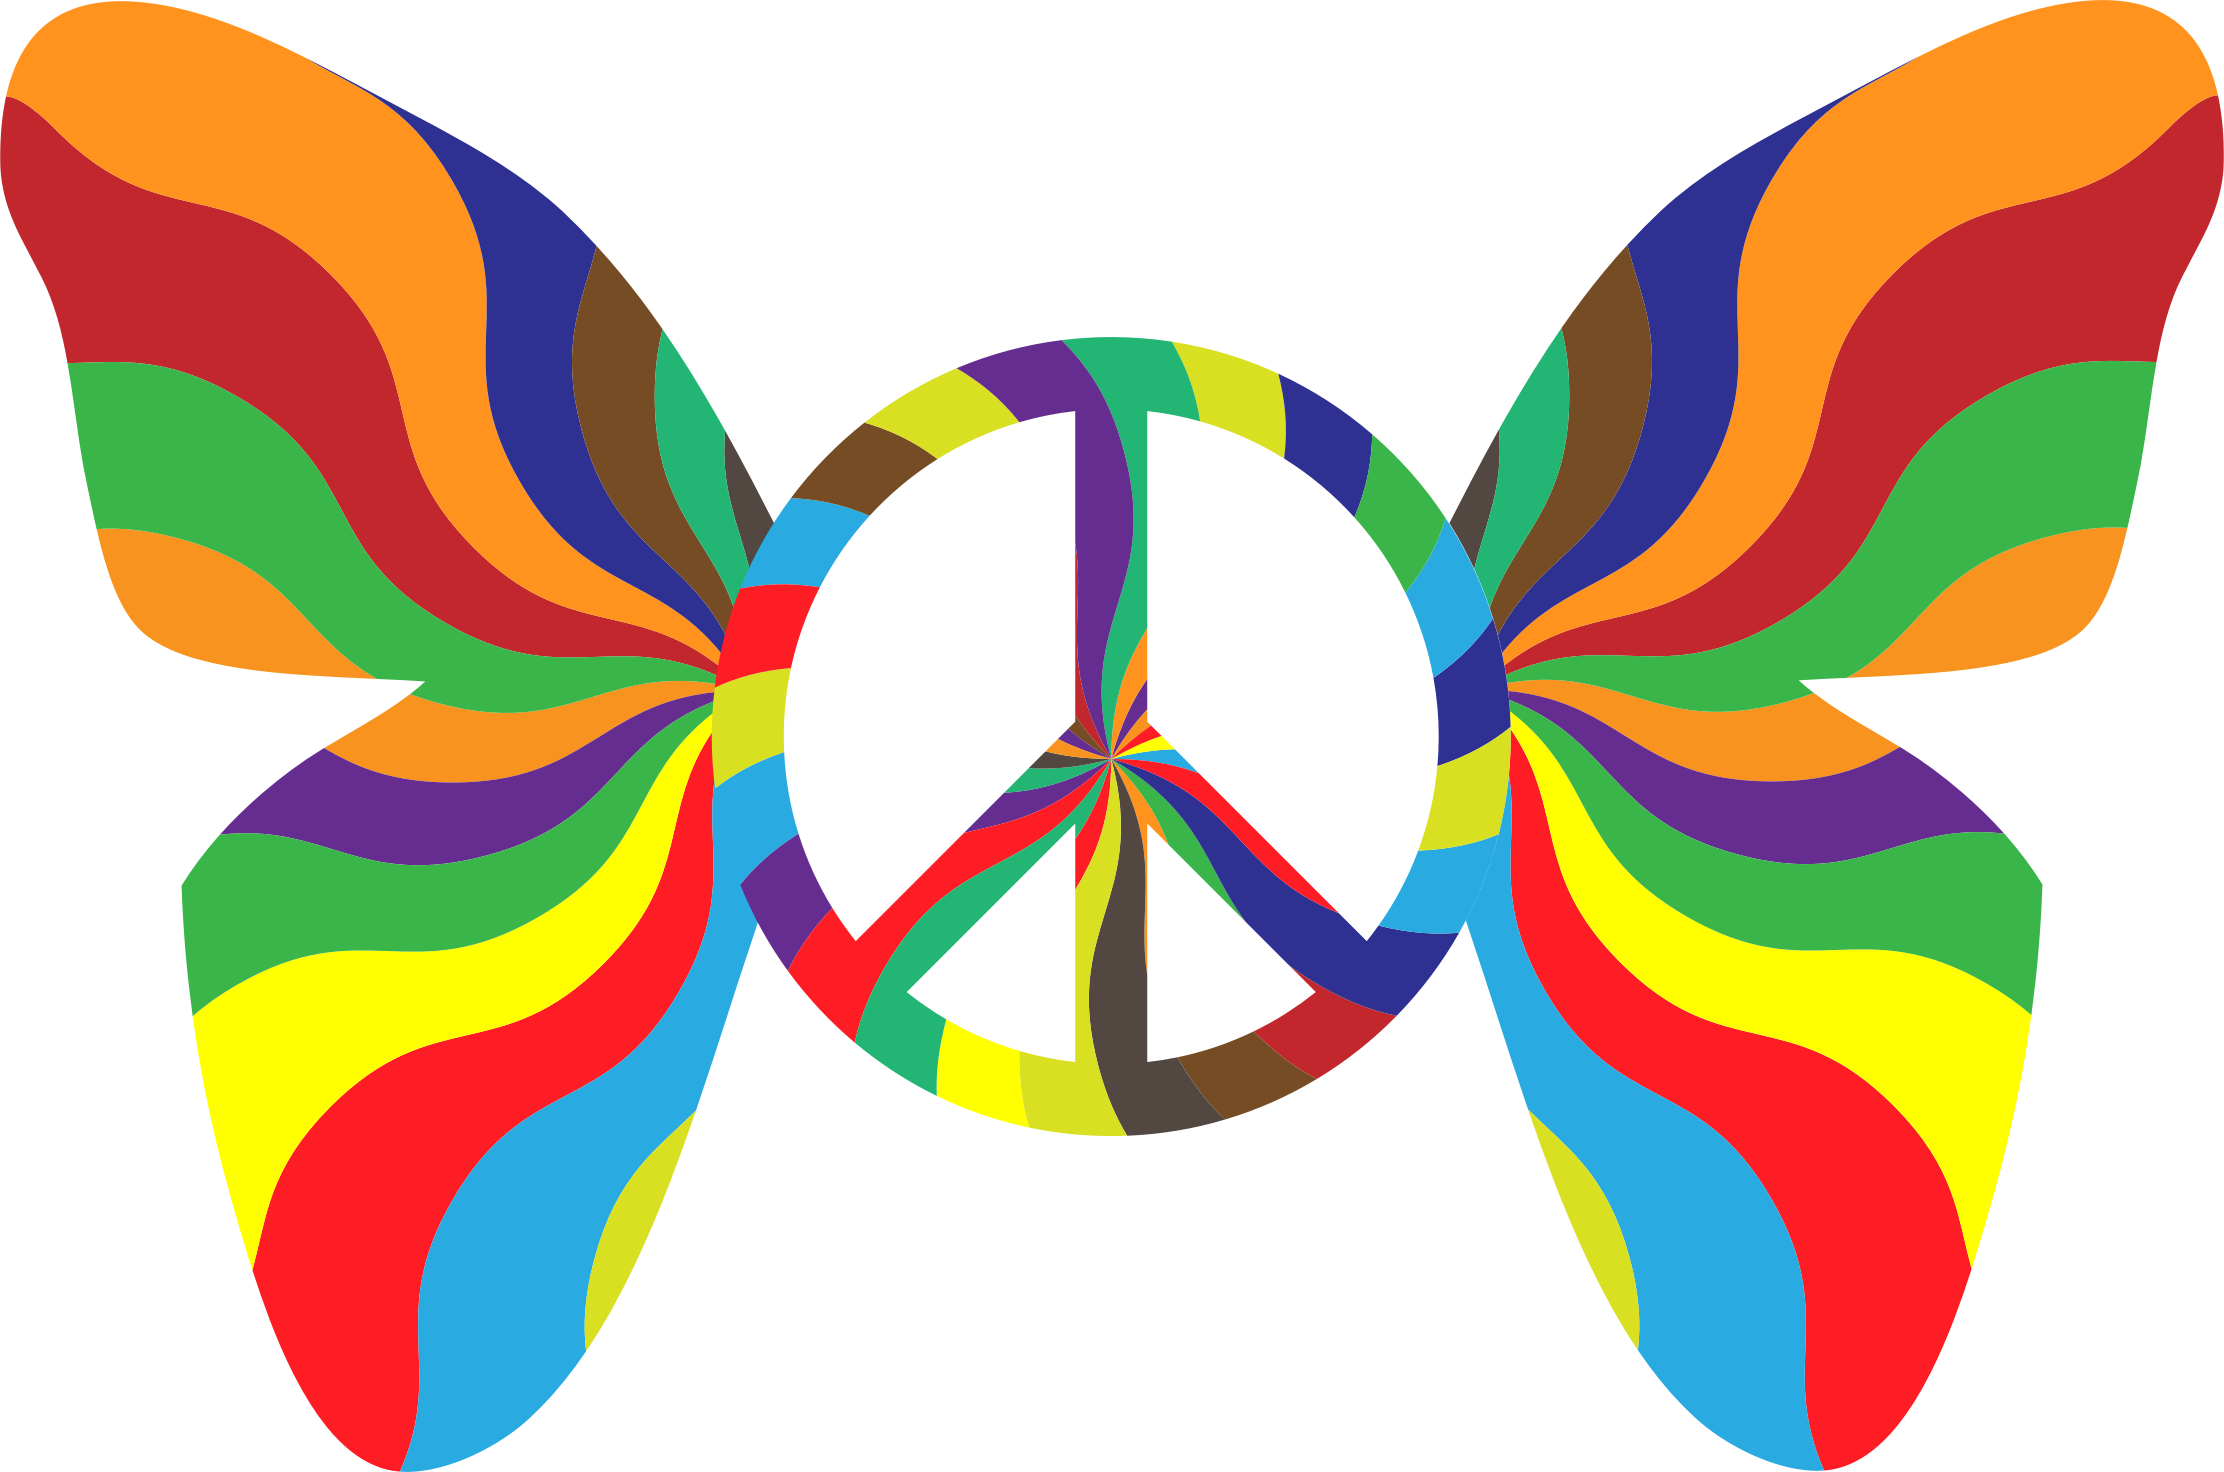 This Free Icons Png Design Of Groovy Peace Sign Butterfly - Retro Starker Regenbogen Der Bicycle Spielkarten (2224x1472)